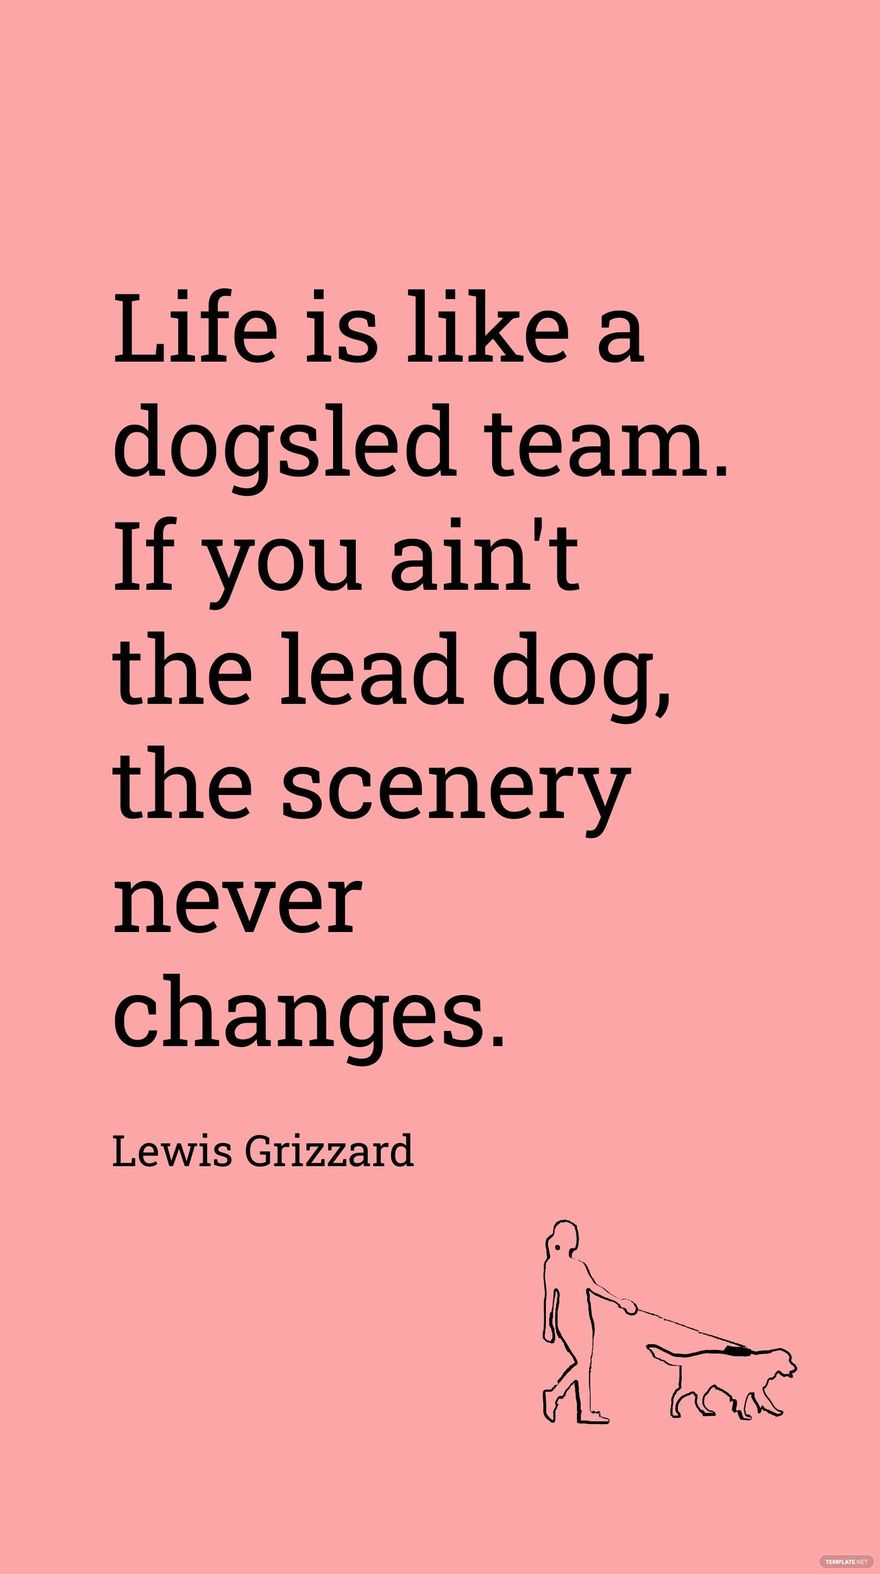 Lewis Grizzard - Life is like a dogsled team. If you ain't the lead dog, the scenery never changes.